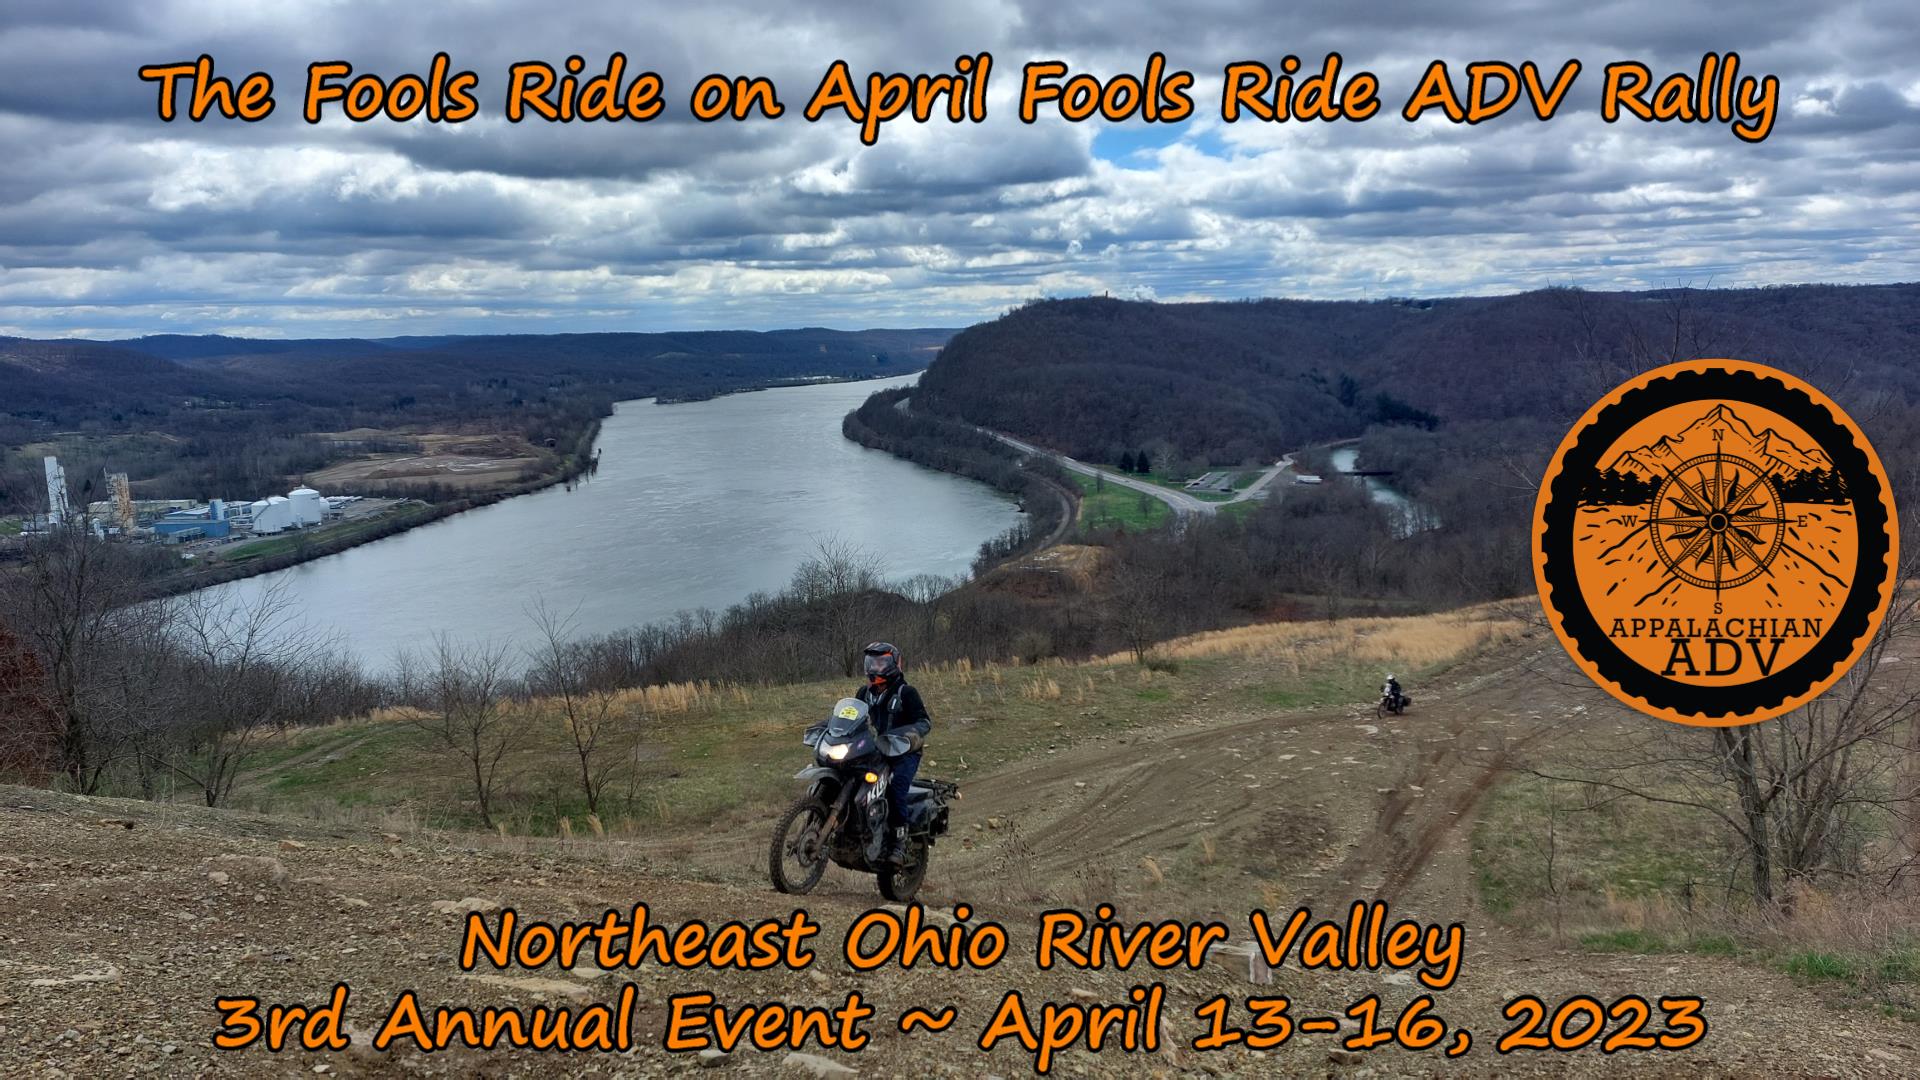 The Fools Ride on April Fools Ride ADV Rally, 3rd Annual